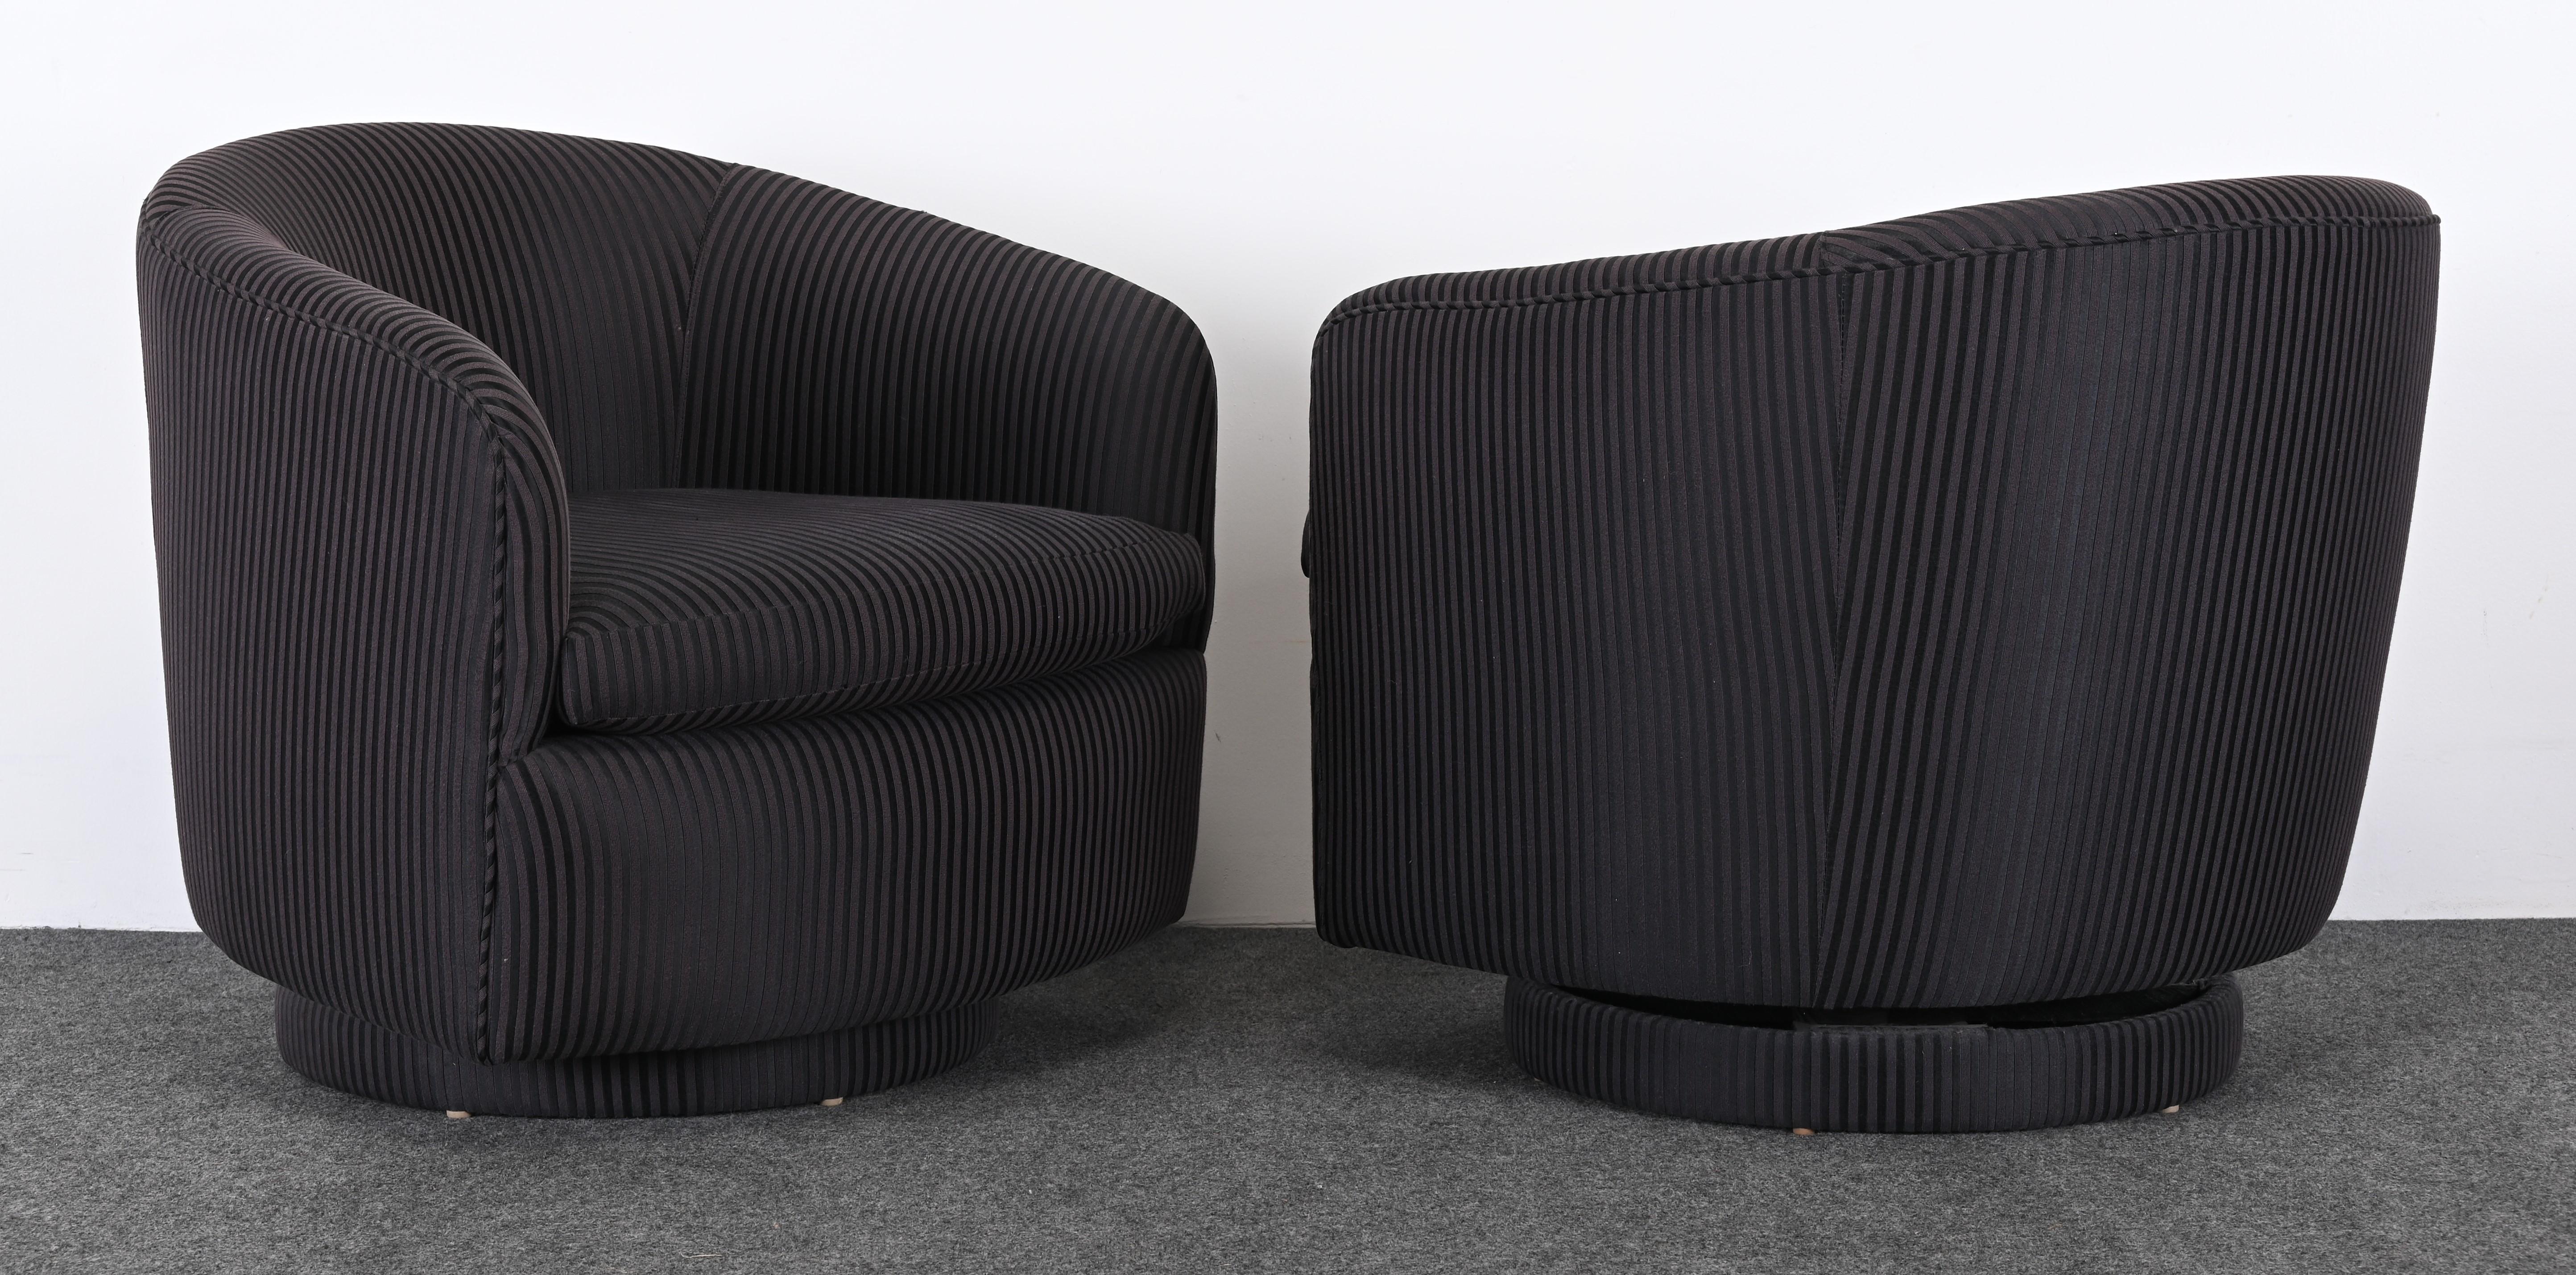 A pair of chic black and grey striped swivel chairs by Milo Baughman for Thayer Coggin, 1990s. The fabric has been newly upholstered five years ago by the original owners. These handsome swivel and rock chairs are very pleasing and ready to place.